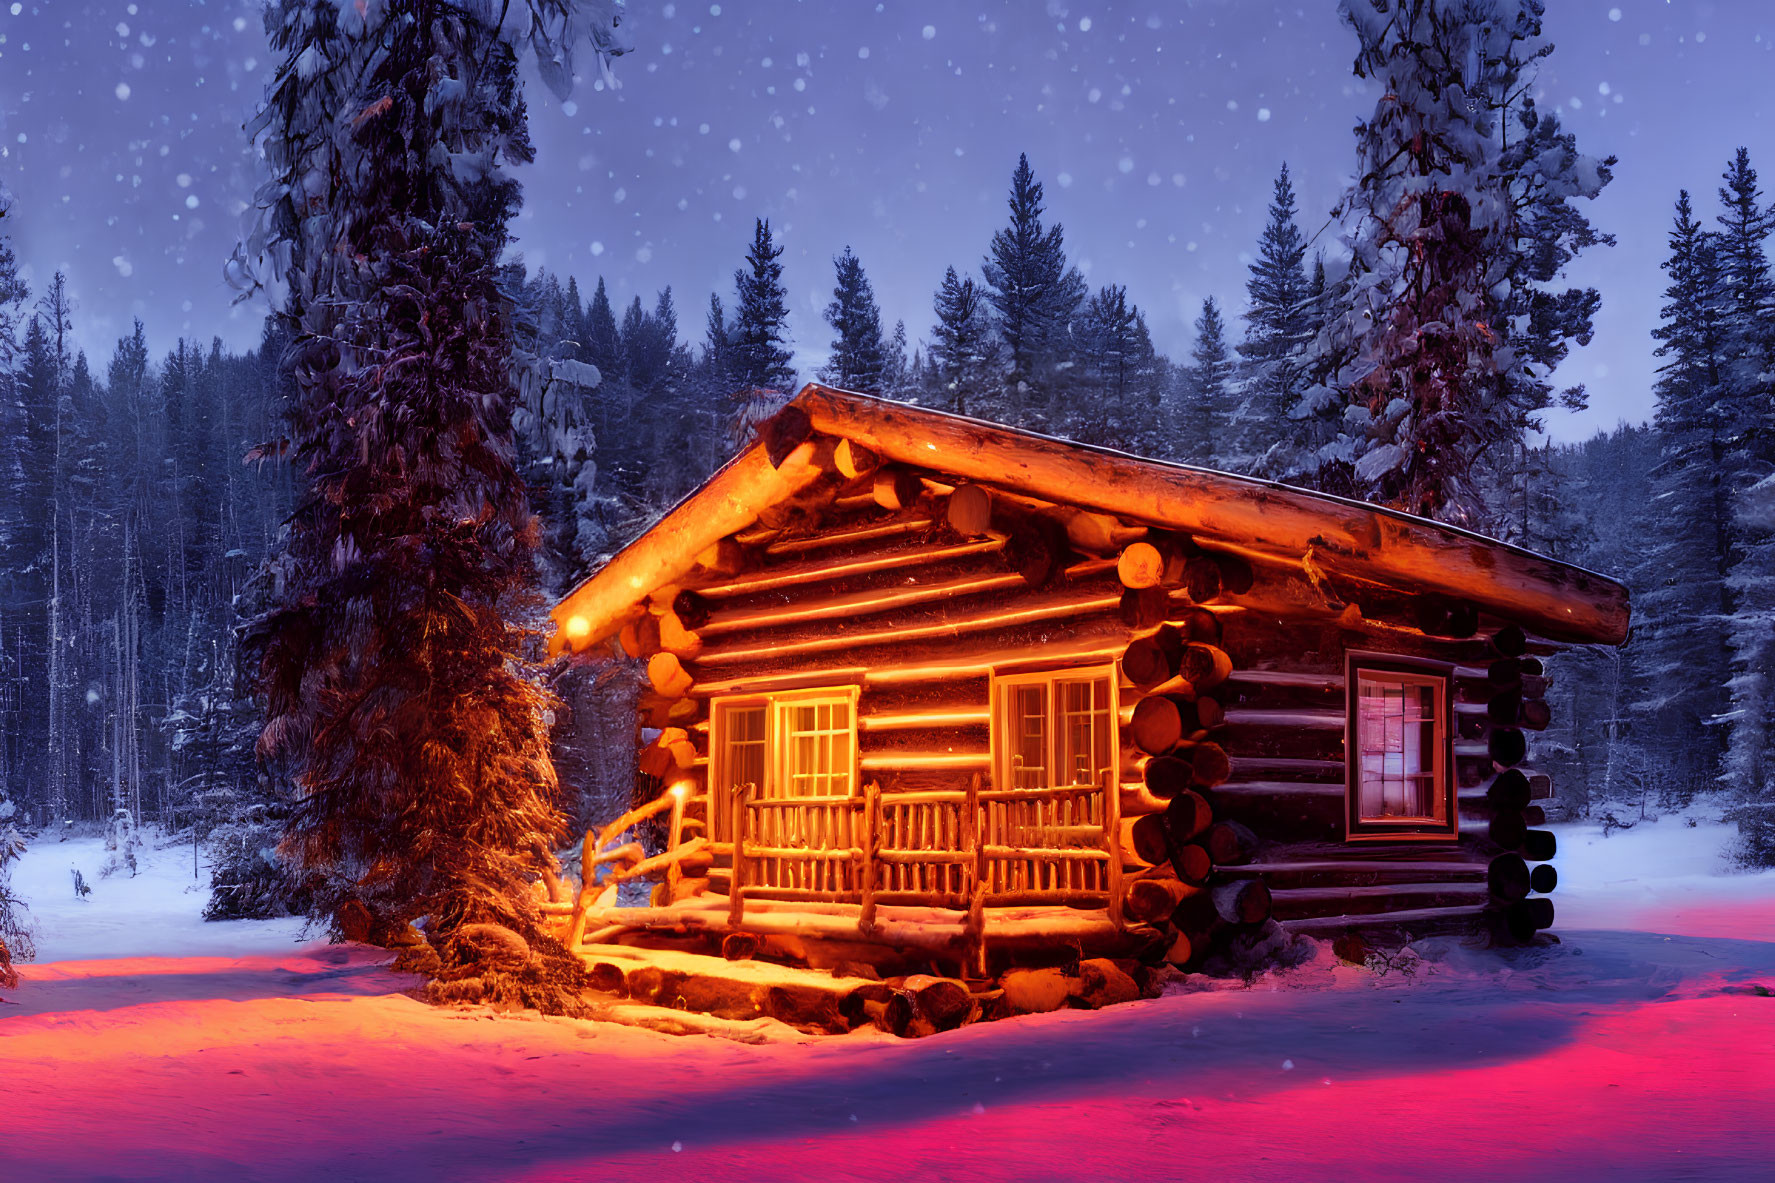 Snowy forest log cabin under twilight sky with falling snowflakes